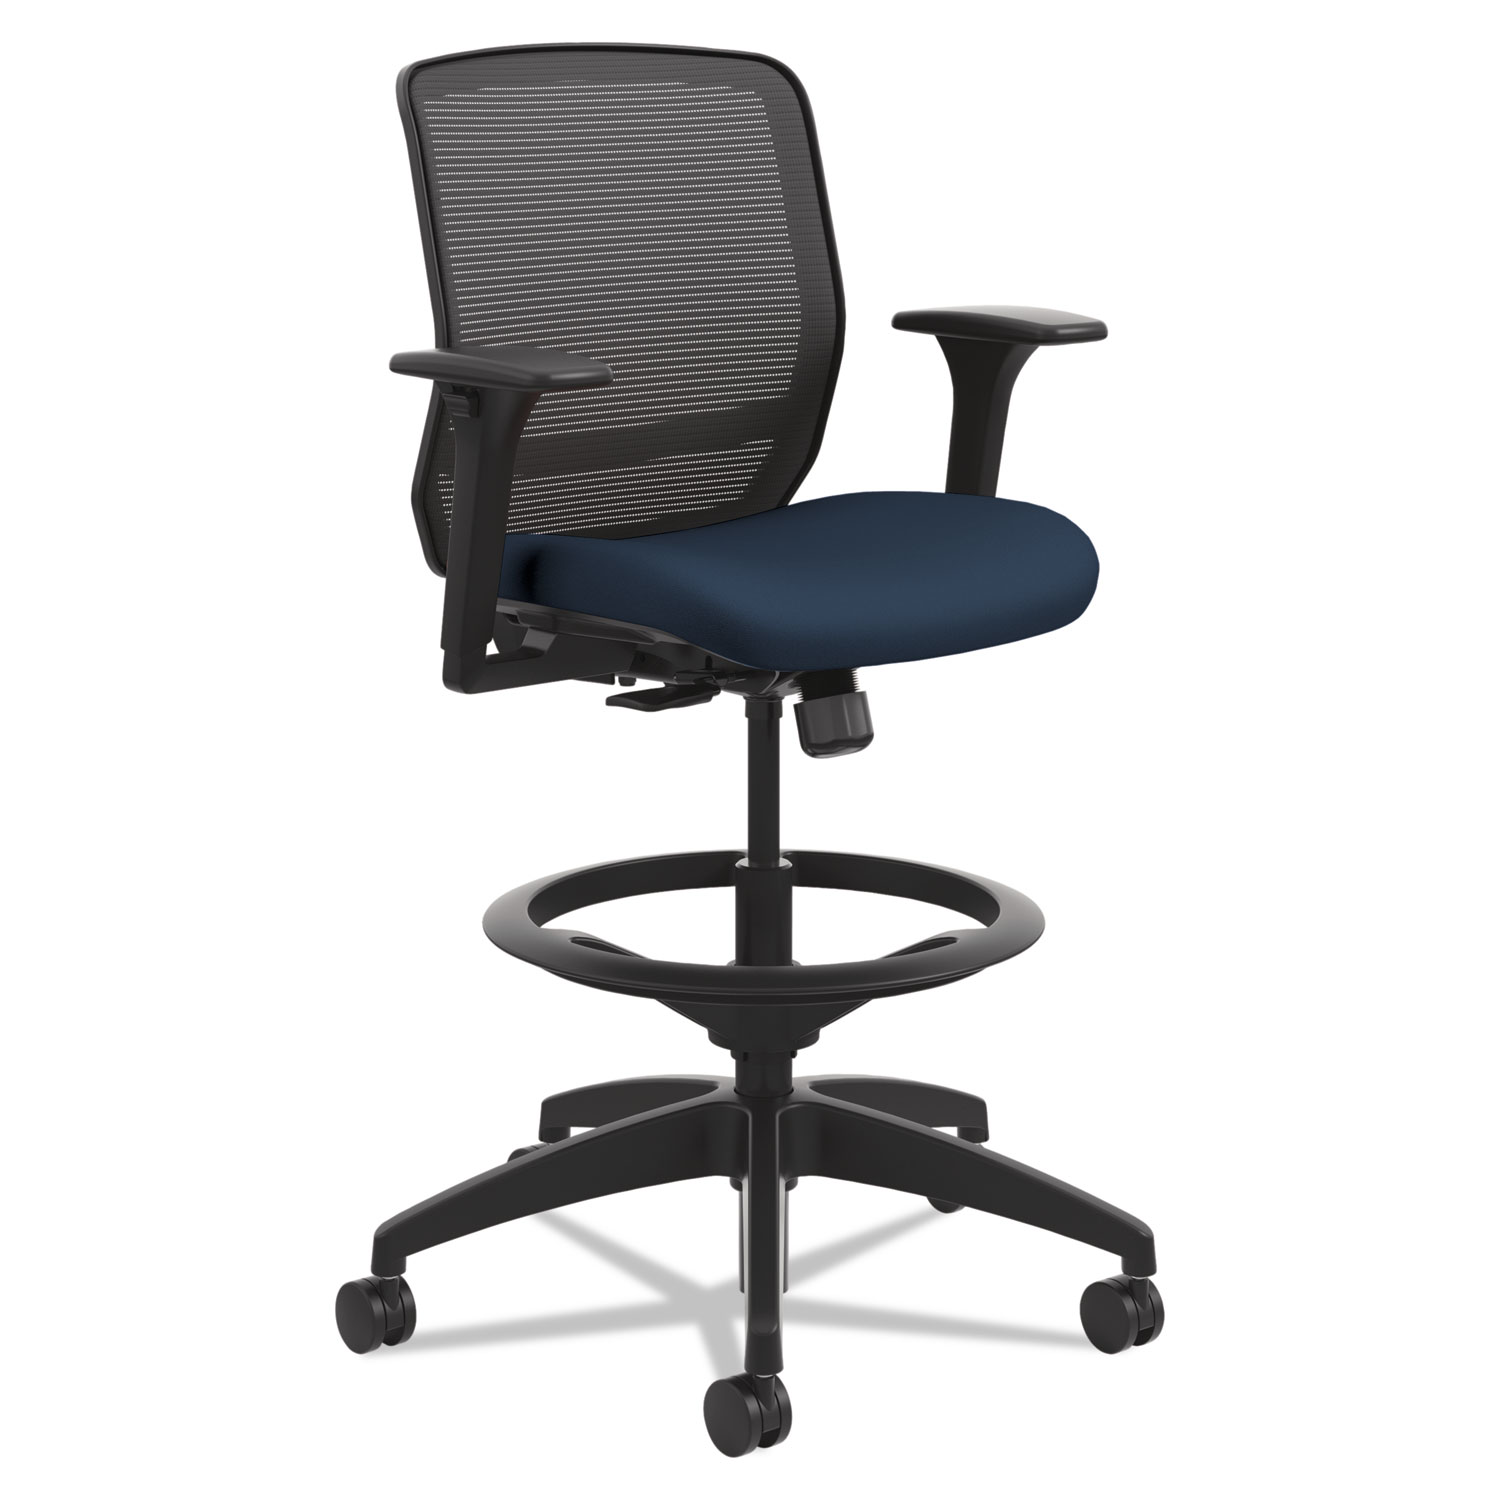  HON HQTSM.Y0.A.H.IM.CU98.SB Quotient Series Mesh Mid-Back Task Stool, 33 Seat Height, Supports up to 300 lbs., Navy Seat/Black Back, Black Base (HONQTSMY1ACU98) 